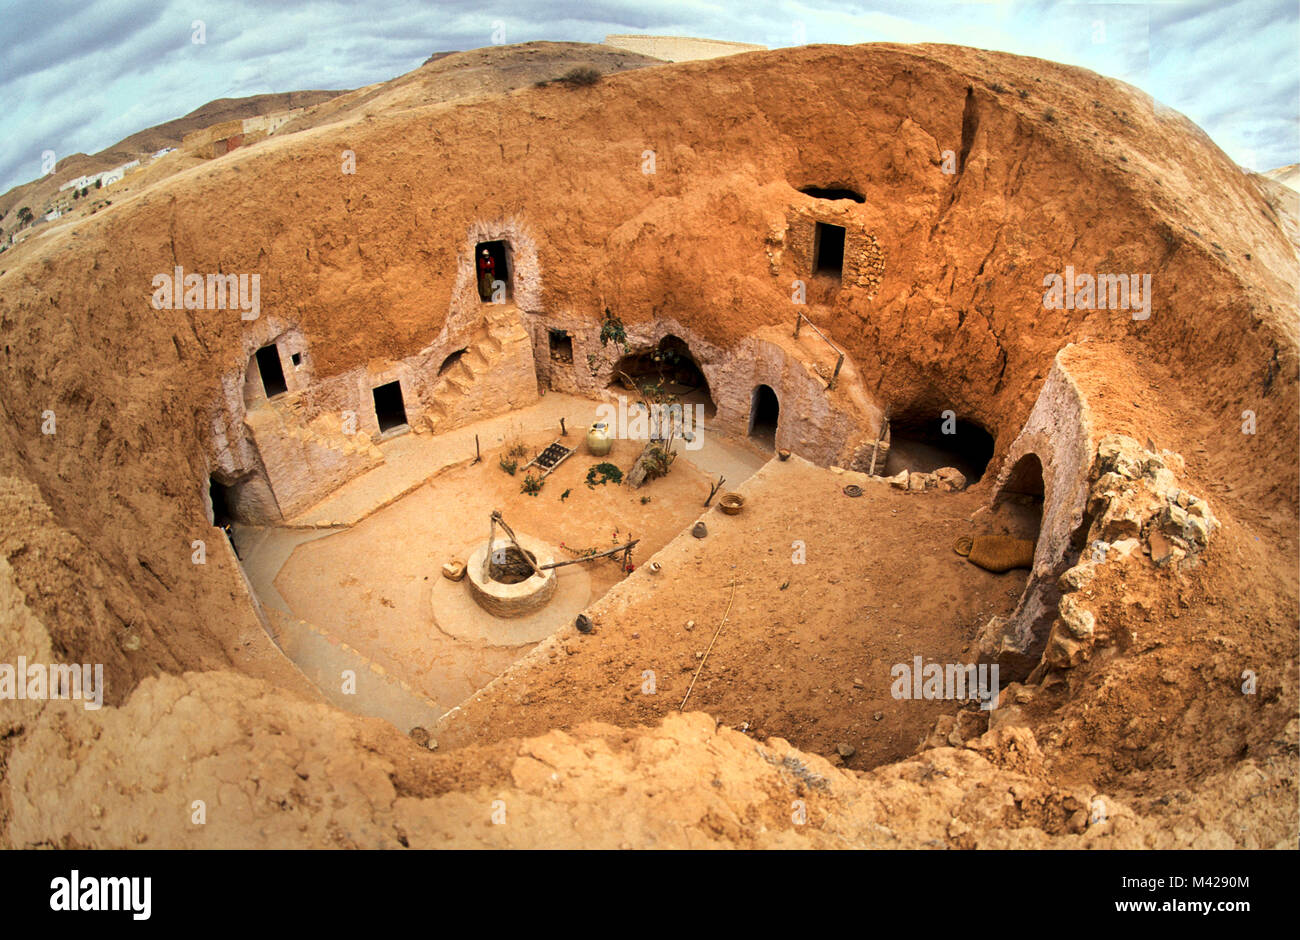 Tunisia. Matmata oasis. Sahara desert. Cave dwelling. complex of underground cave dwellings. Warm in winter, cool in summer. Stock Photo